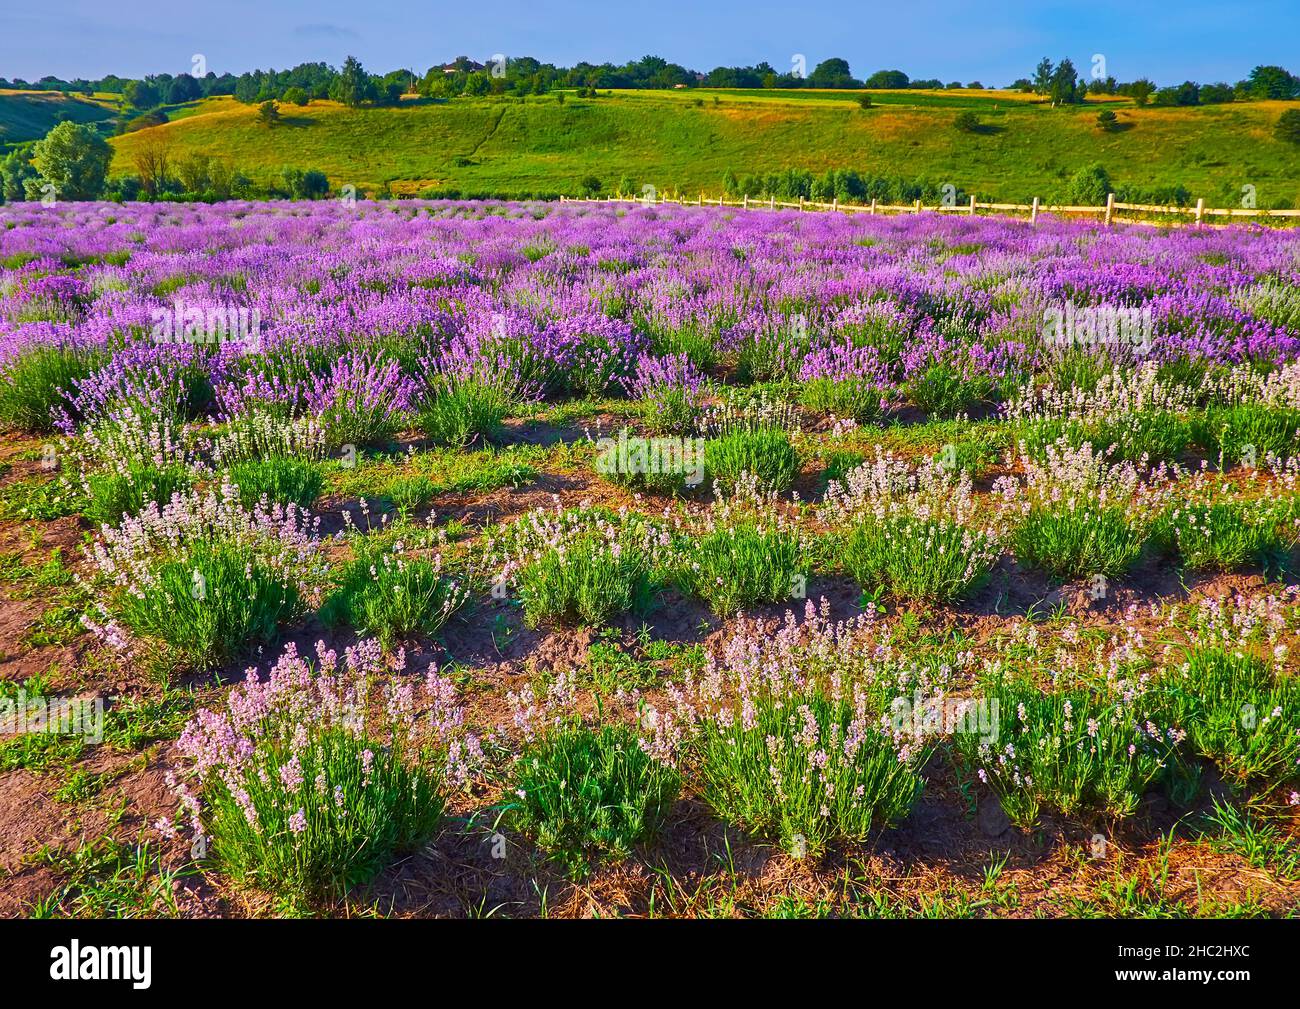 The natural beauty of colorful lavender field against the green hills Stock Photo